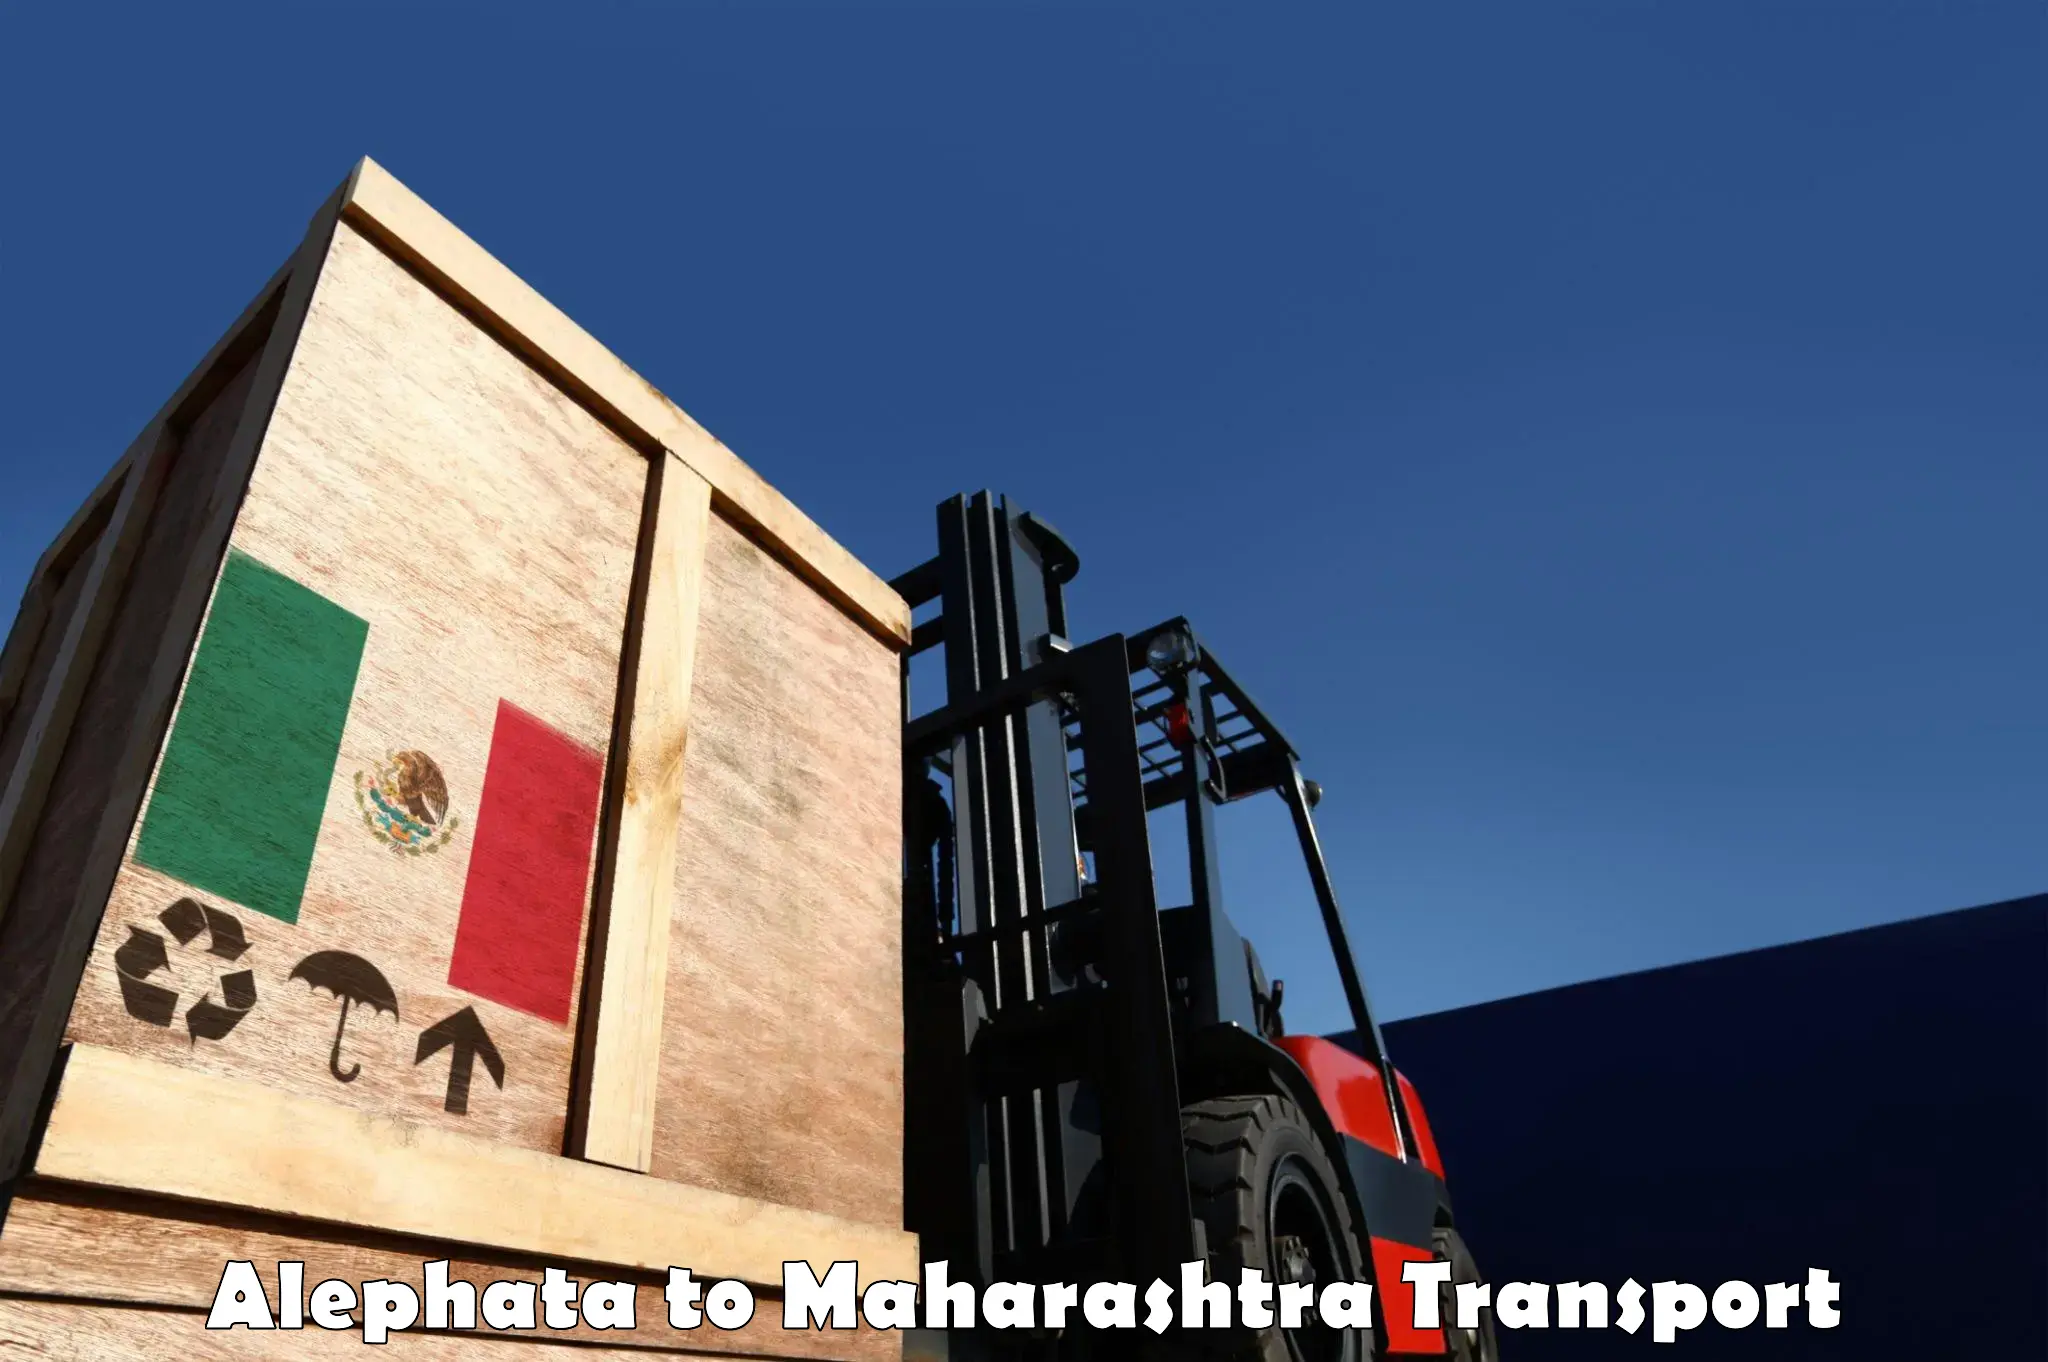 Air freight transport services in Alephata to Shivajinagar